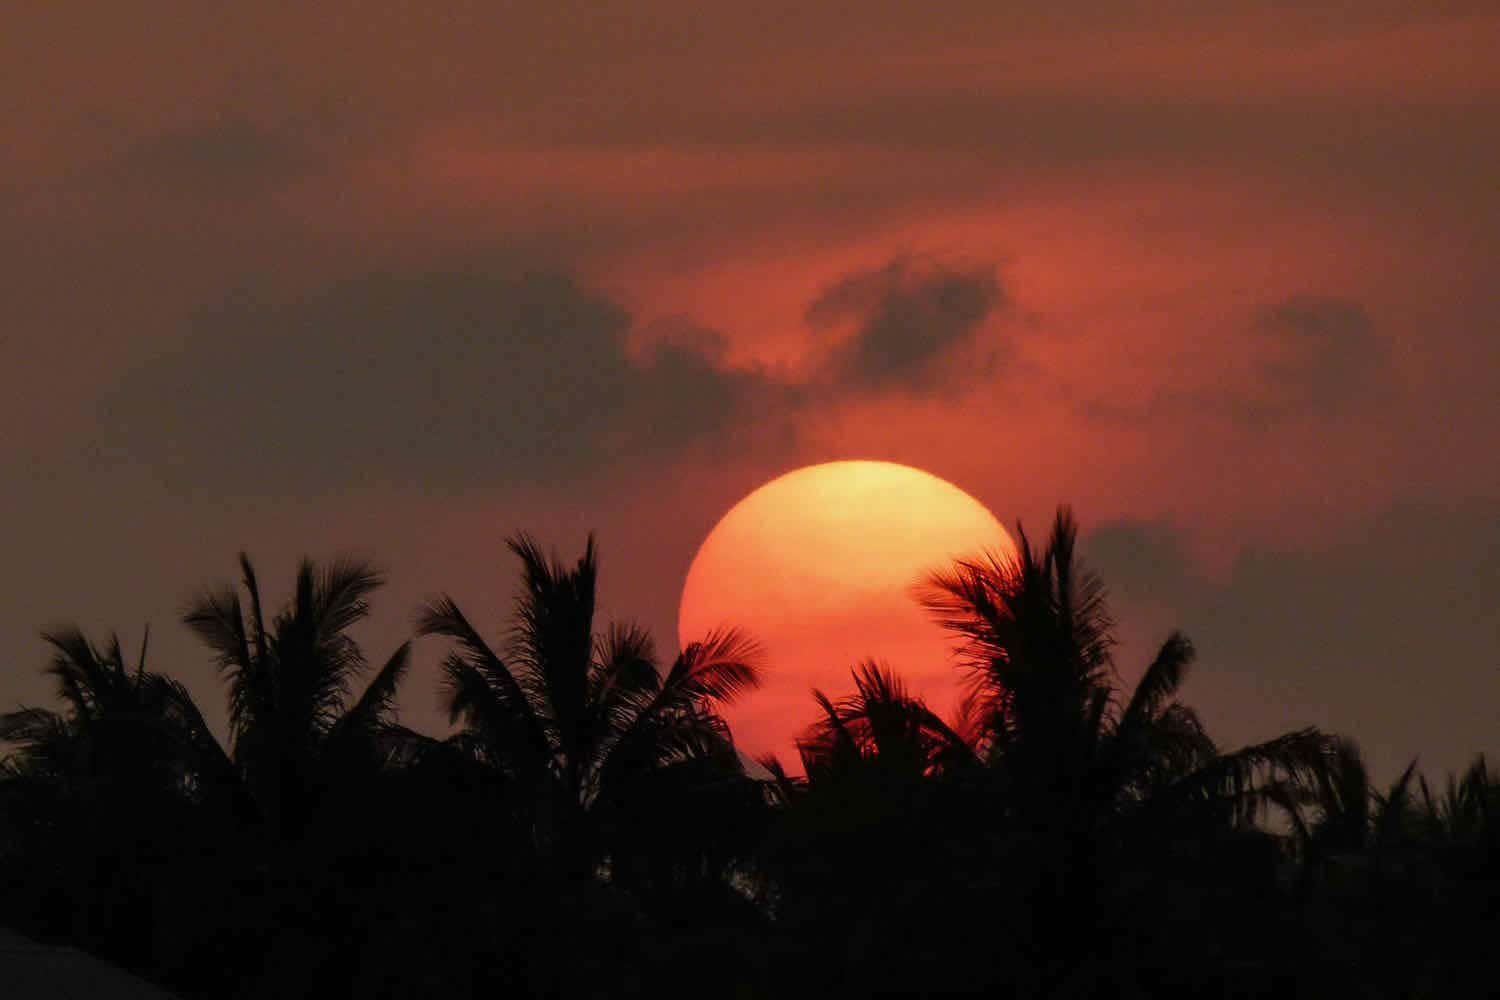 Yellow and red sun setting in a red sky behind palm trees